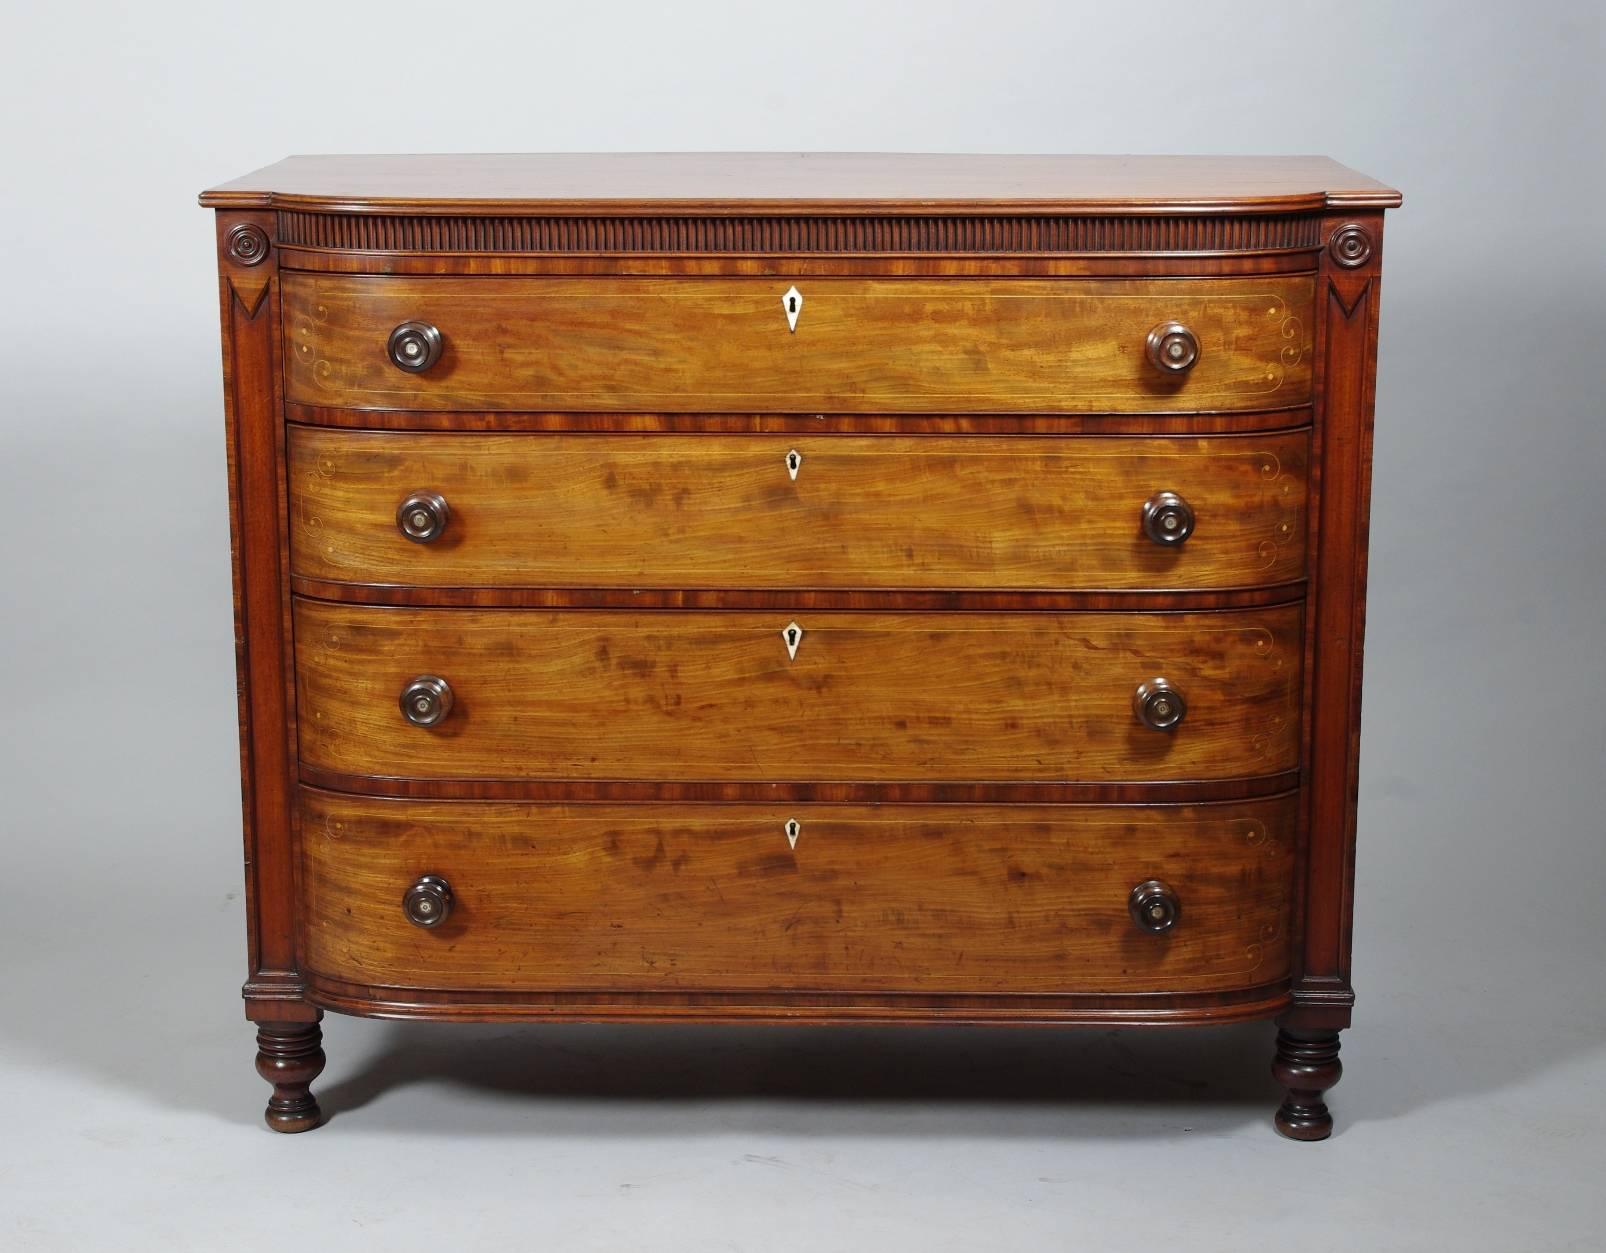 Fine William IV fiddle-back mahogany gentleman's chest of drawers, the rectangular top with an elliptic front and reeded frieze over four long graduated drawers, each with delicate string inlay, bone escutcheon and turned rosewood knobs set with